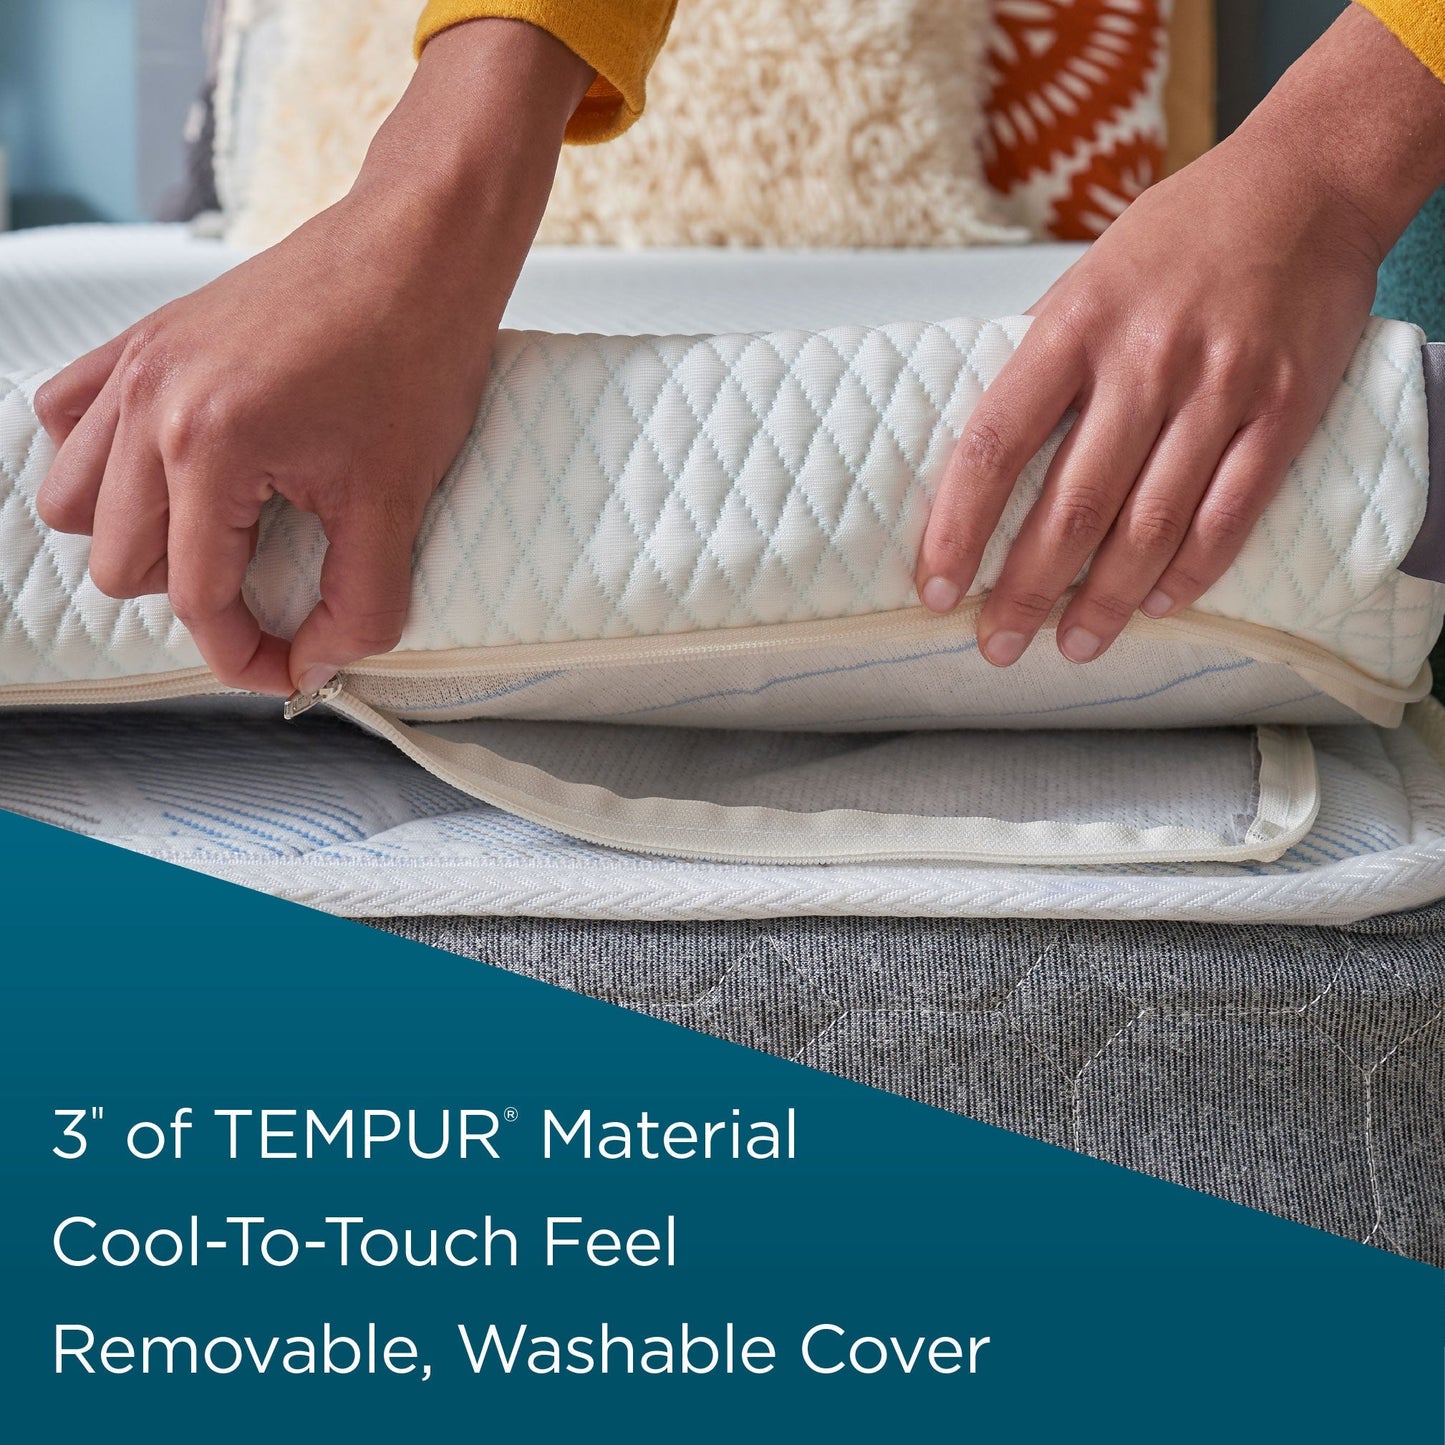 Hands Unzipping The Removable, Washable Cover Of The TEMPUR-Adapt® + Cooling Topper